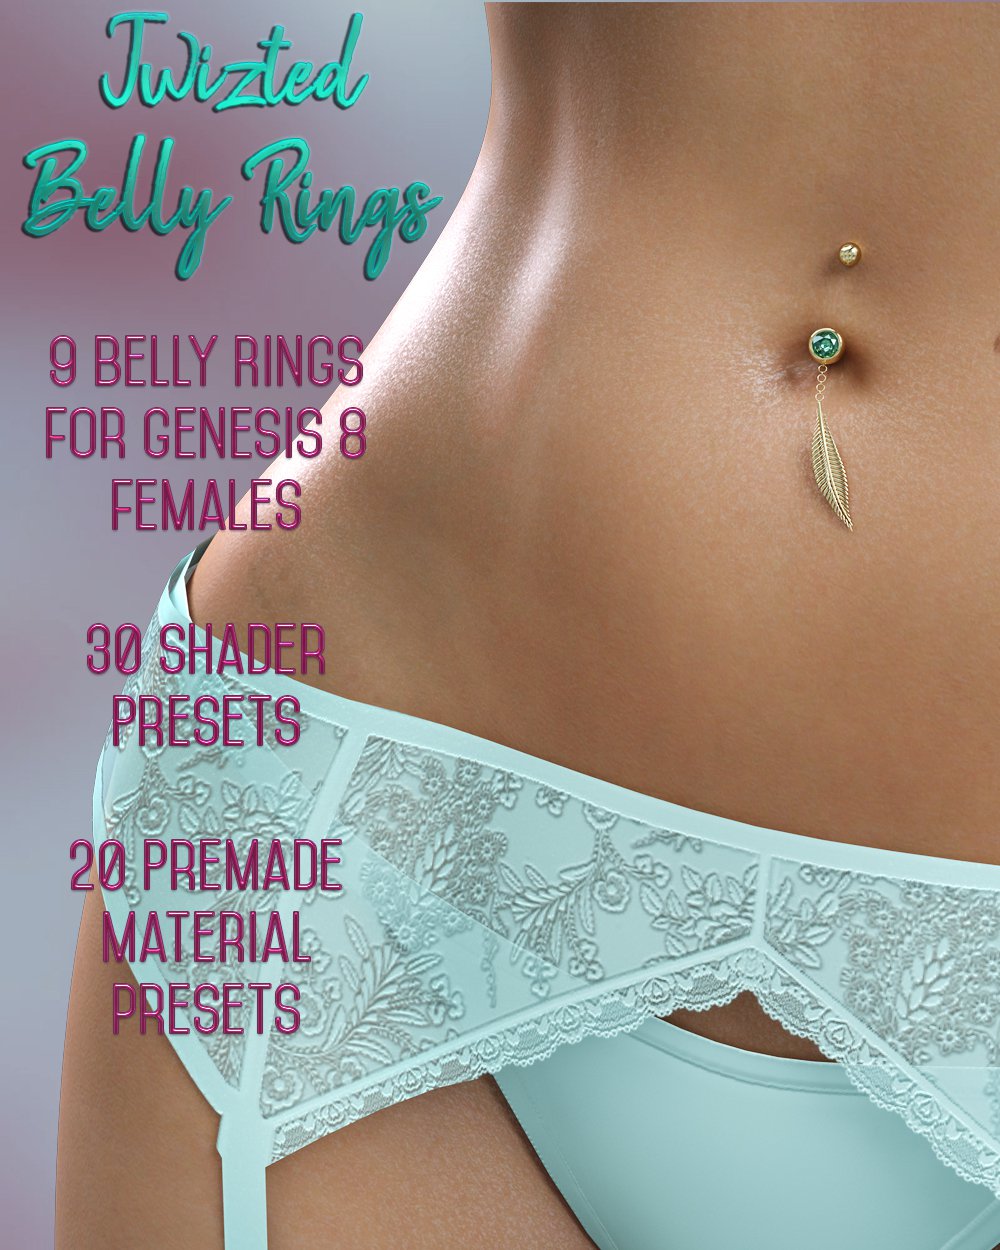 Twizted Belly Rings for Genesis 8 Females_DAZ3DDL